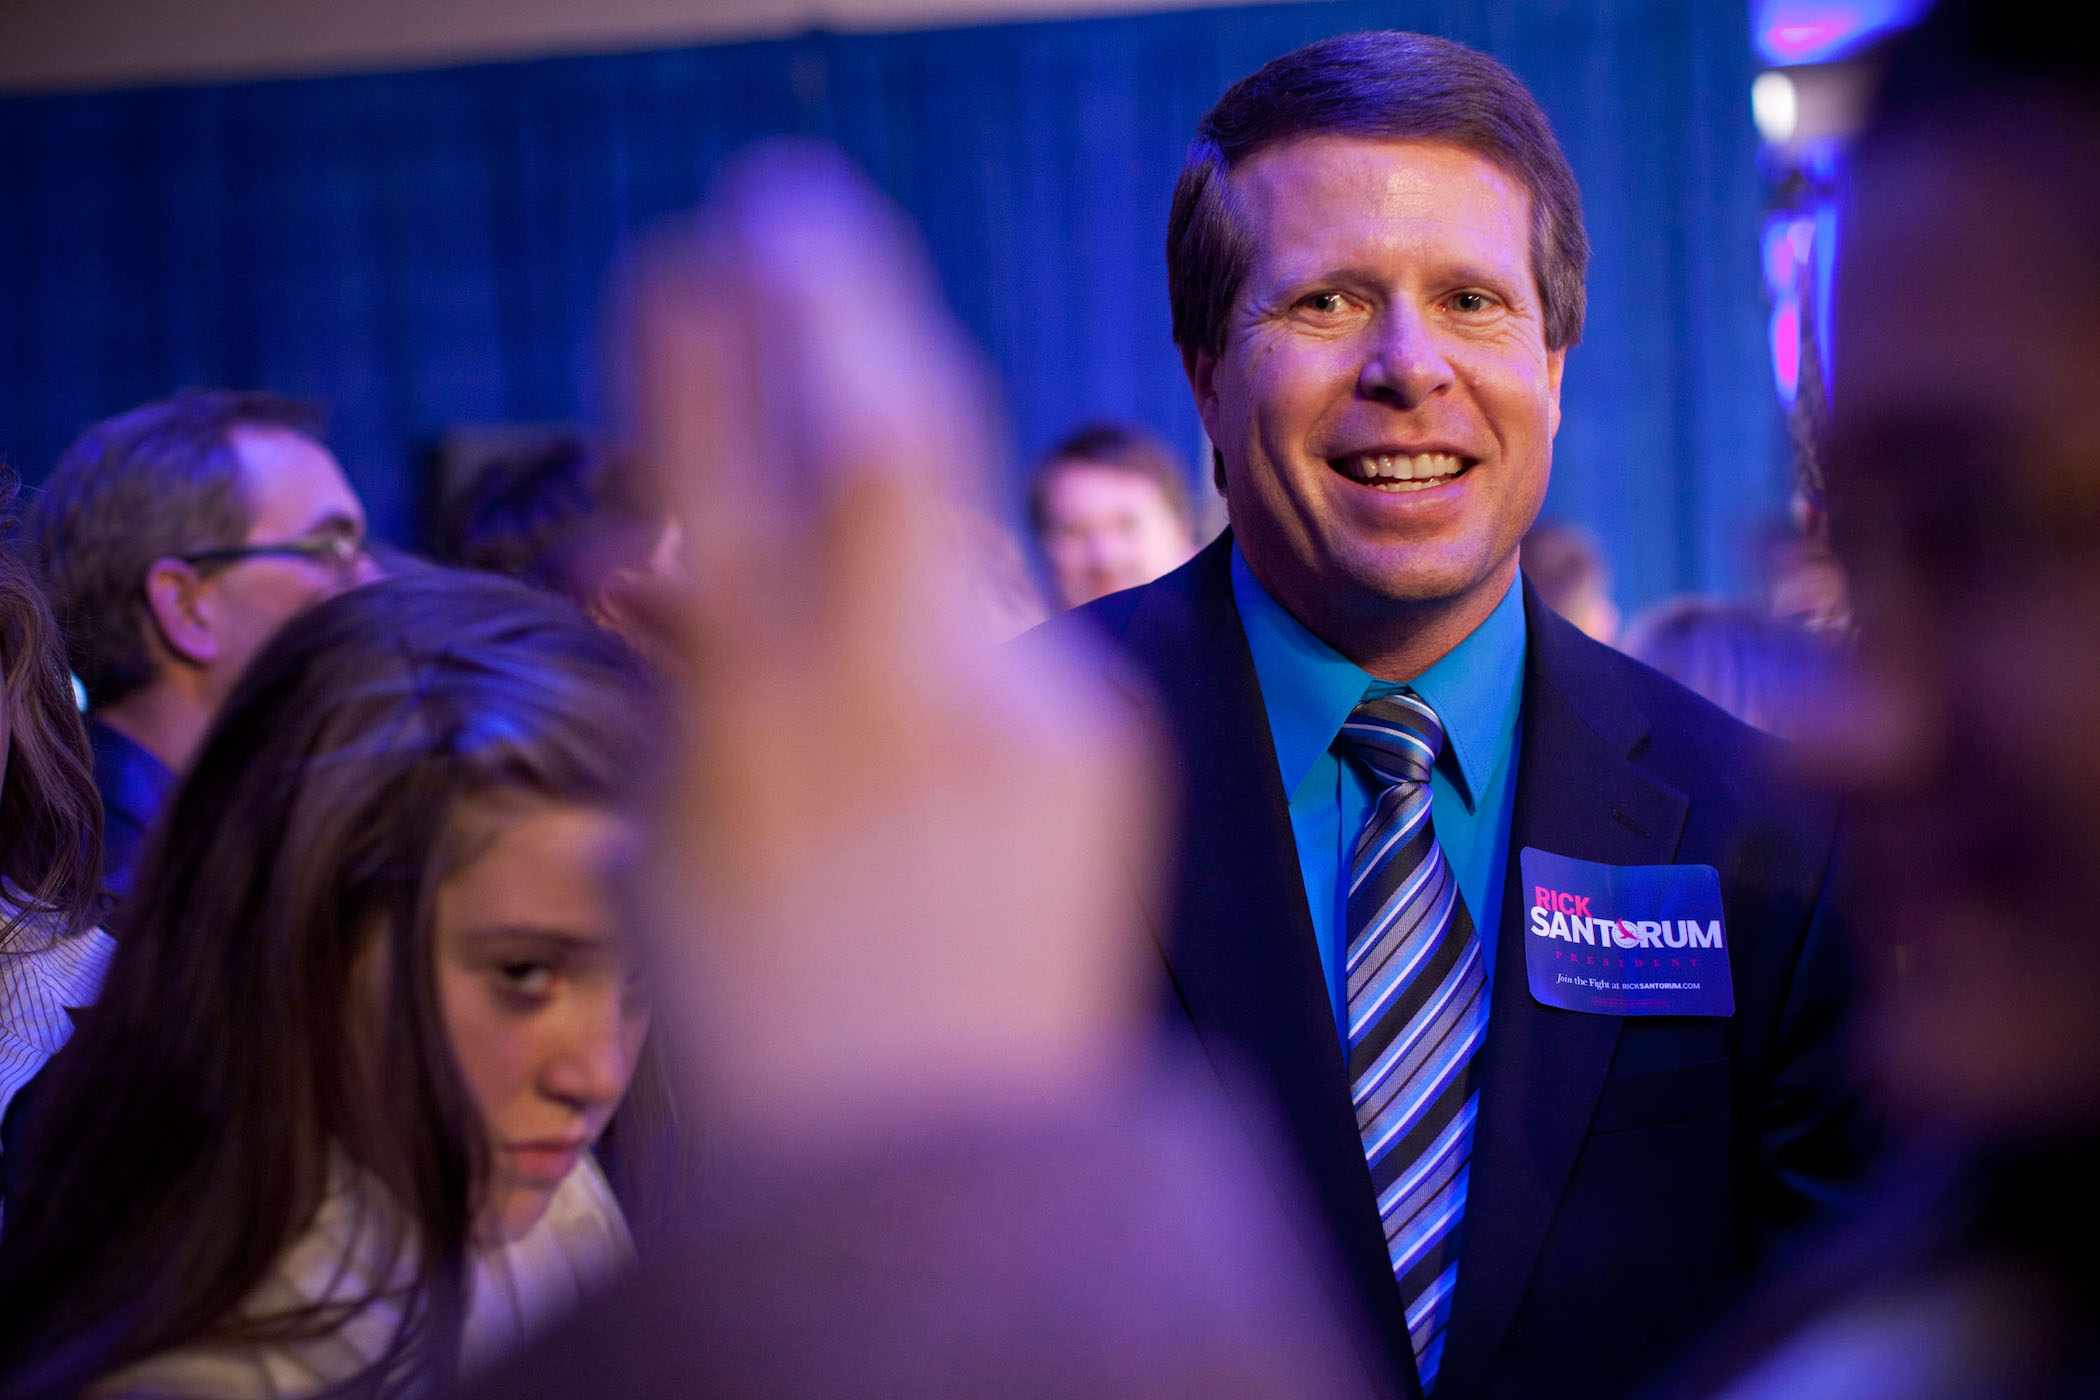 Jim Bob Duggar of the Duggar family from 'Counting On' smiling at an event.